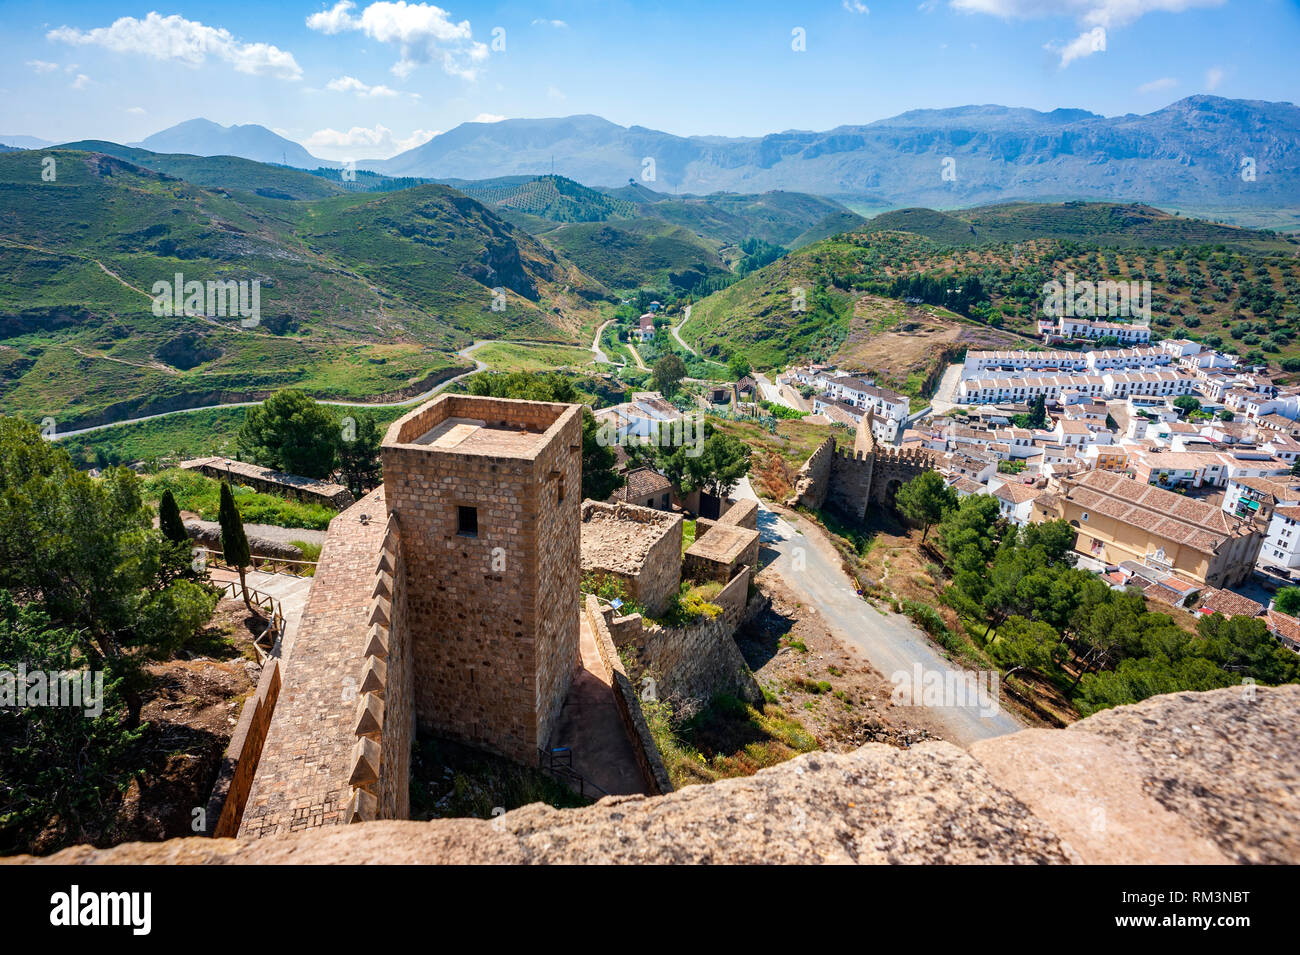 A view of the ramparts and surrounding countryside from the alcazaba, or Moorish fortress, in Antequera, Andalusia, Spain. Inhabited since the Bronze  Stock Photo